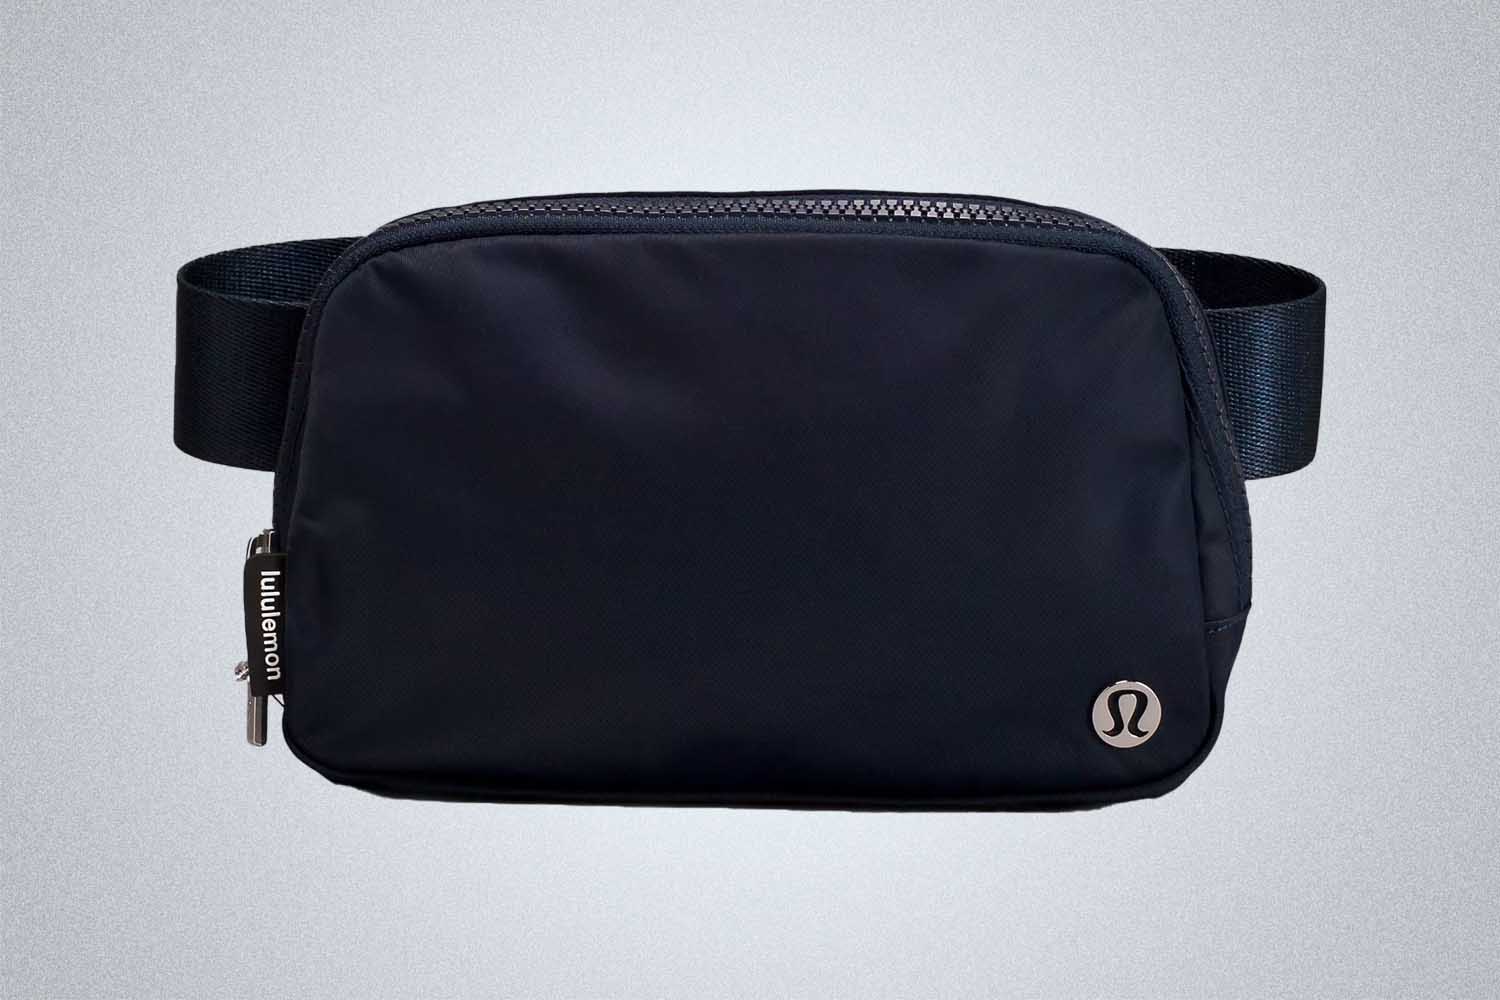 I got the viral Lululemon belt bag — and here's how it lives up to the hype